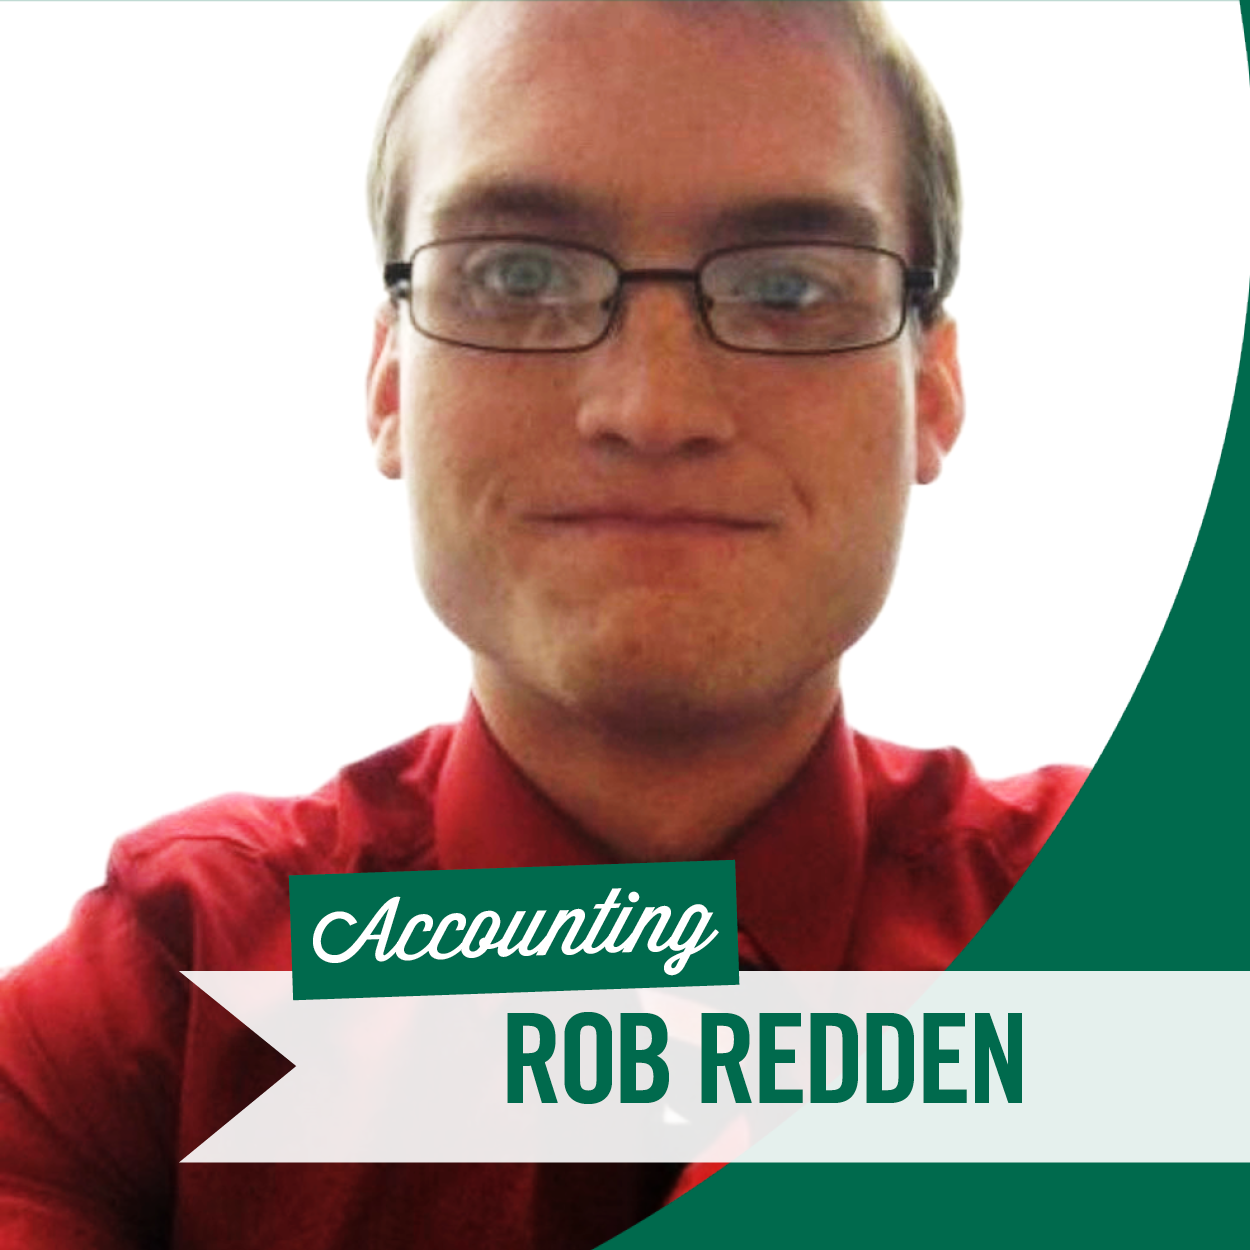 Rob Redden - Accounting - 52nd Rotary Scholars Awards